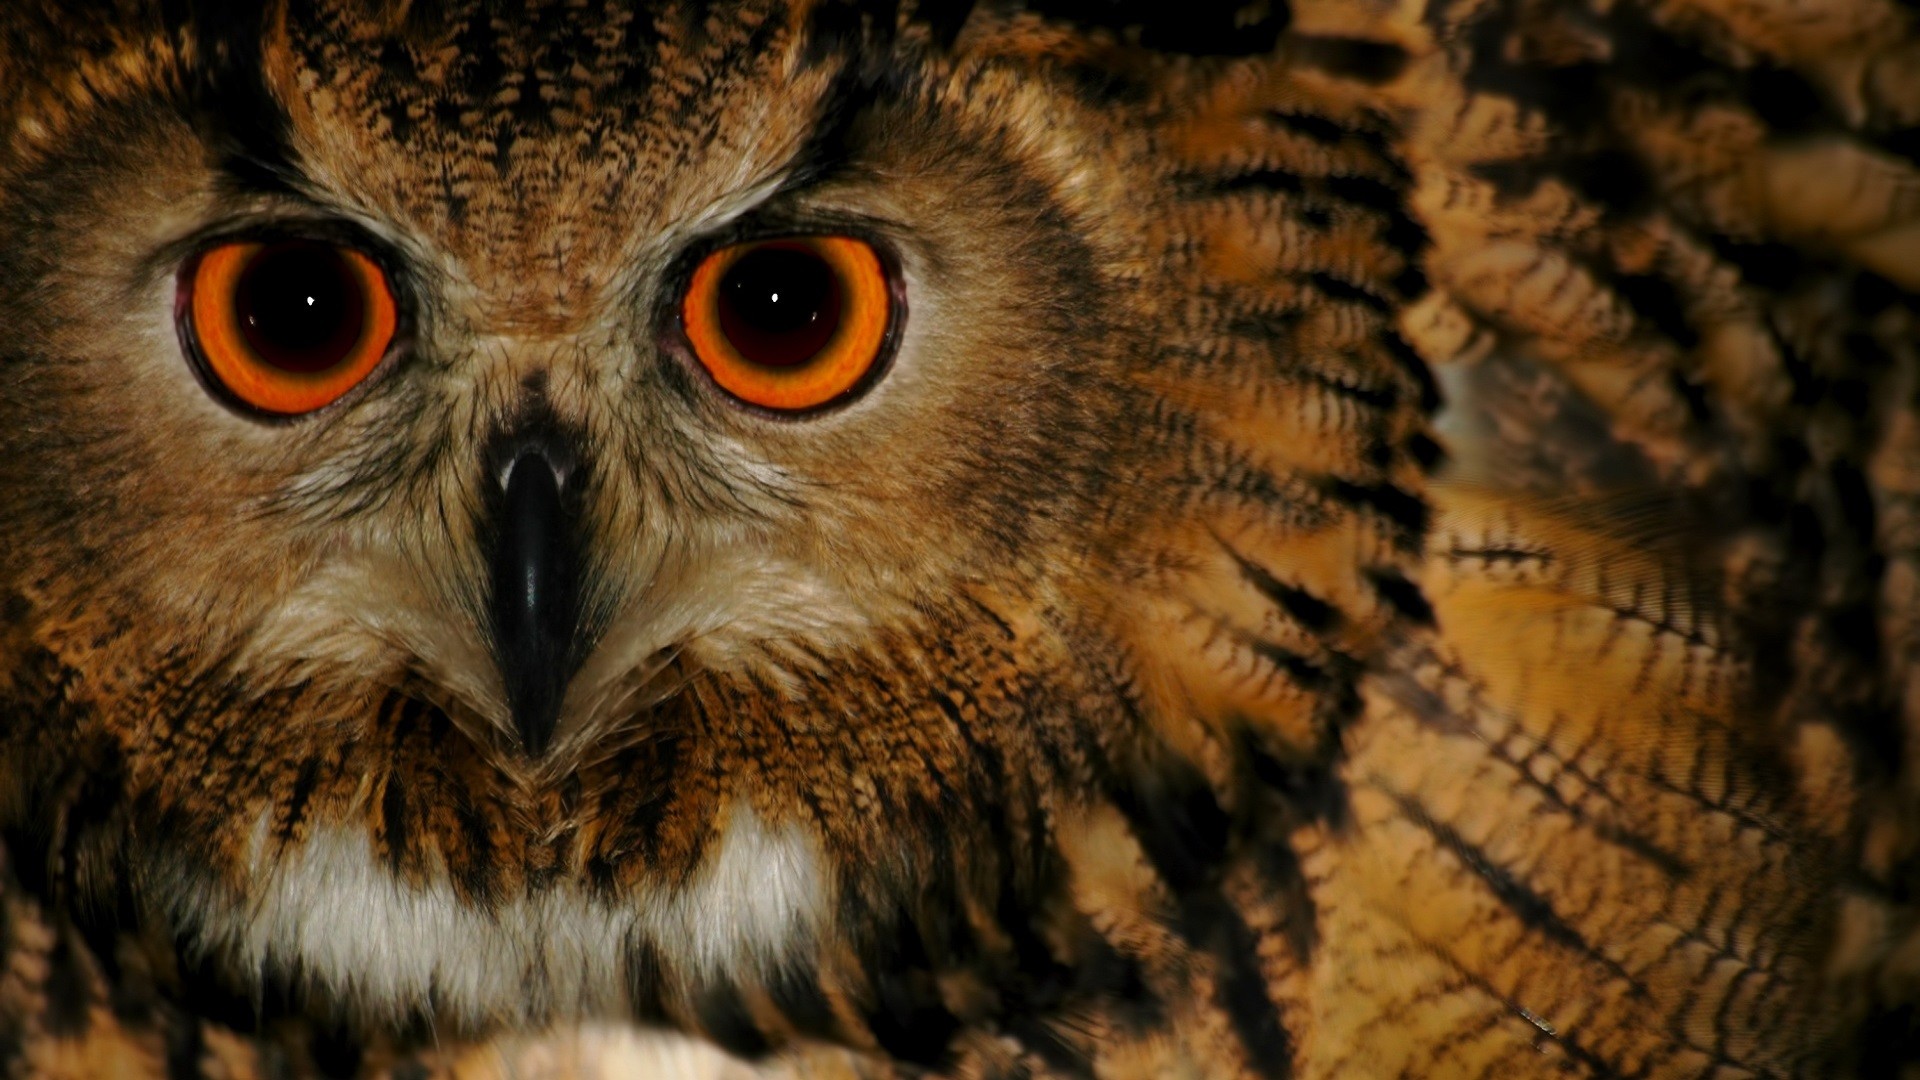 1920x1080 ... hq background wallpapers baby owl - photo #26 ...